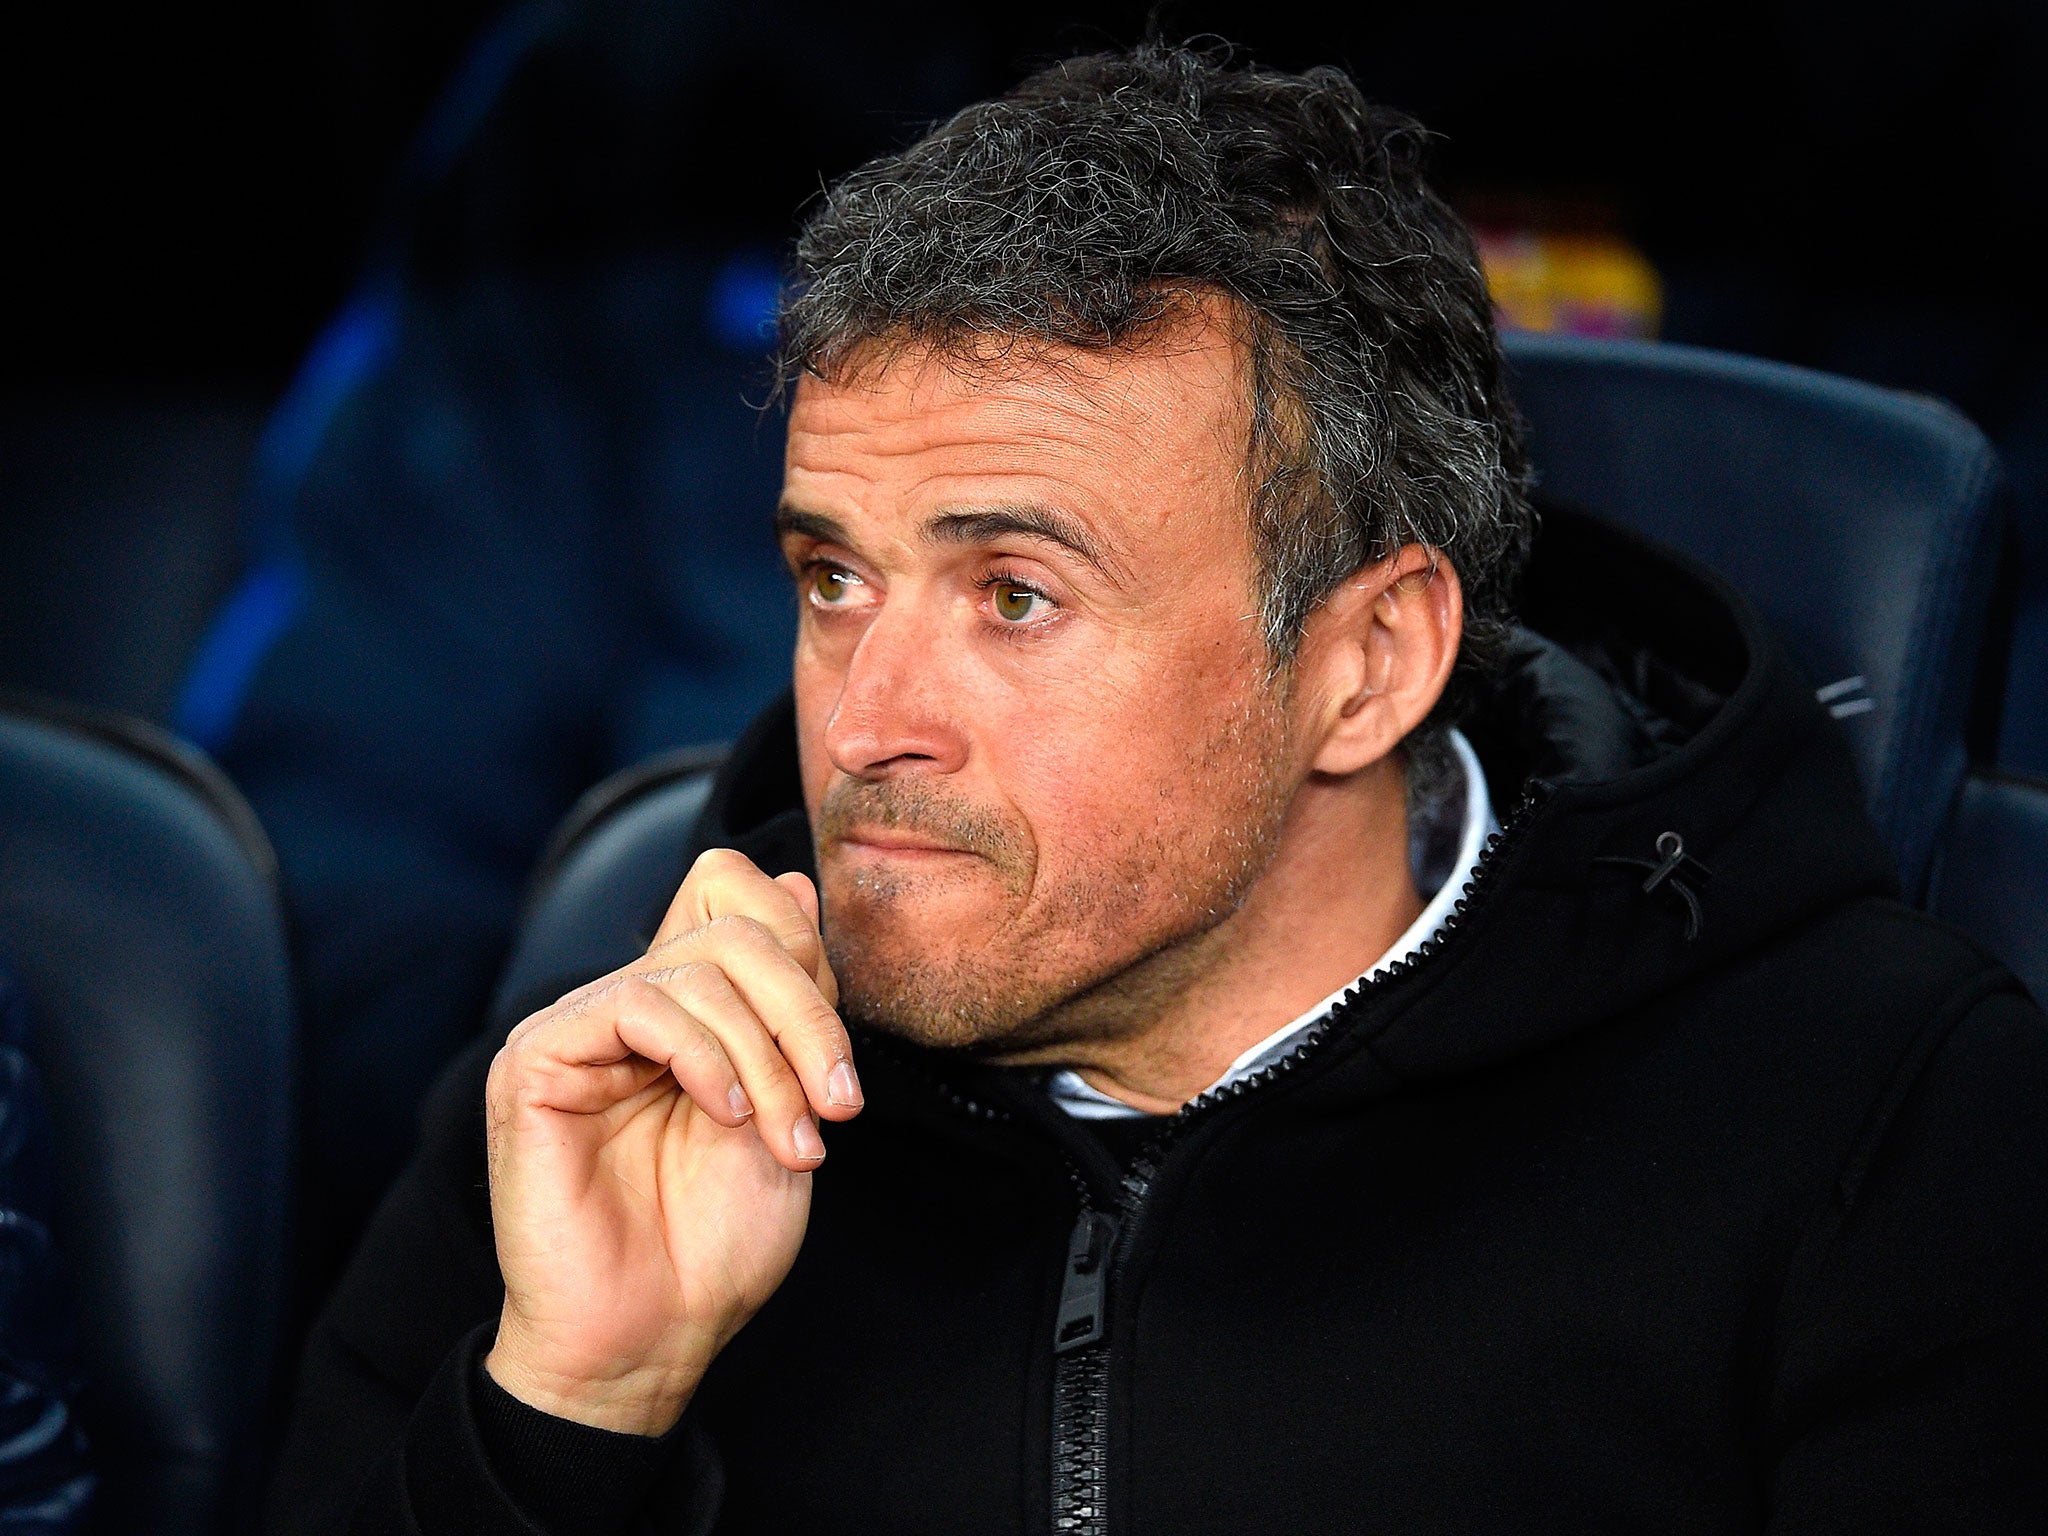 Barcelona are on the lookout for a new coach with Luis Enrique set to depart